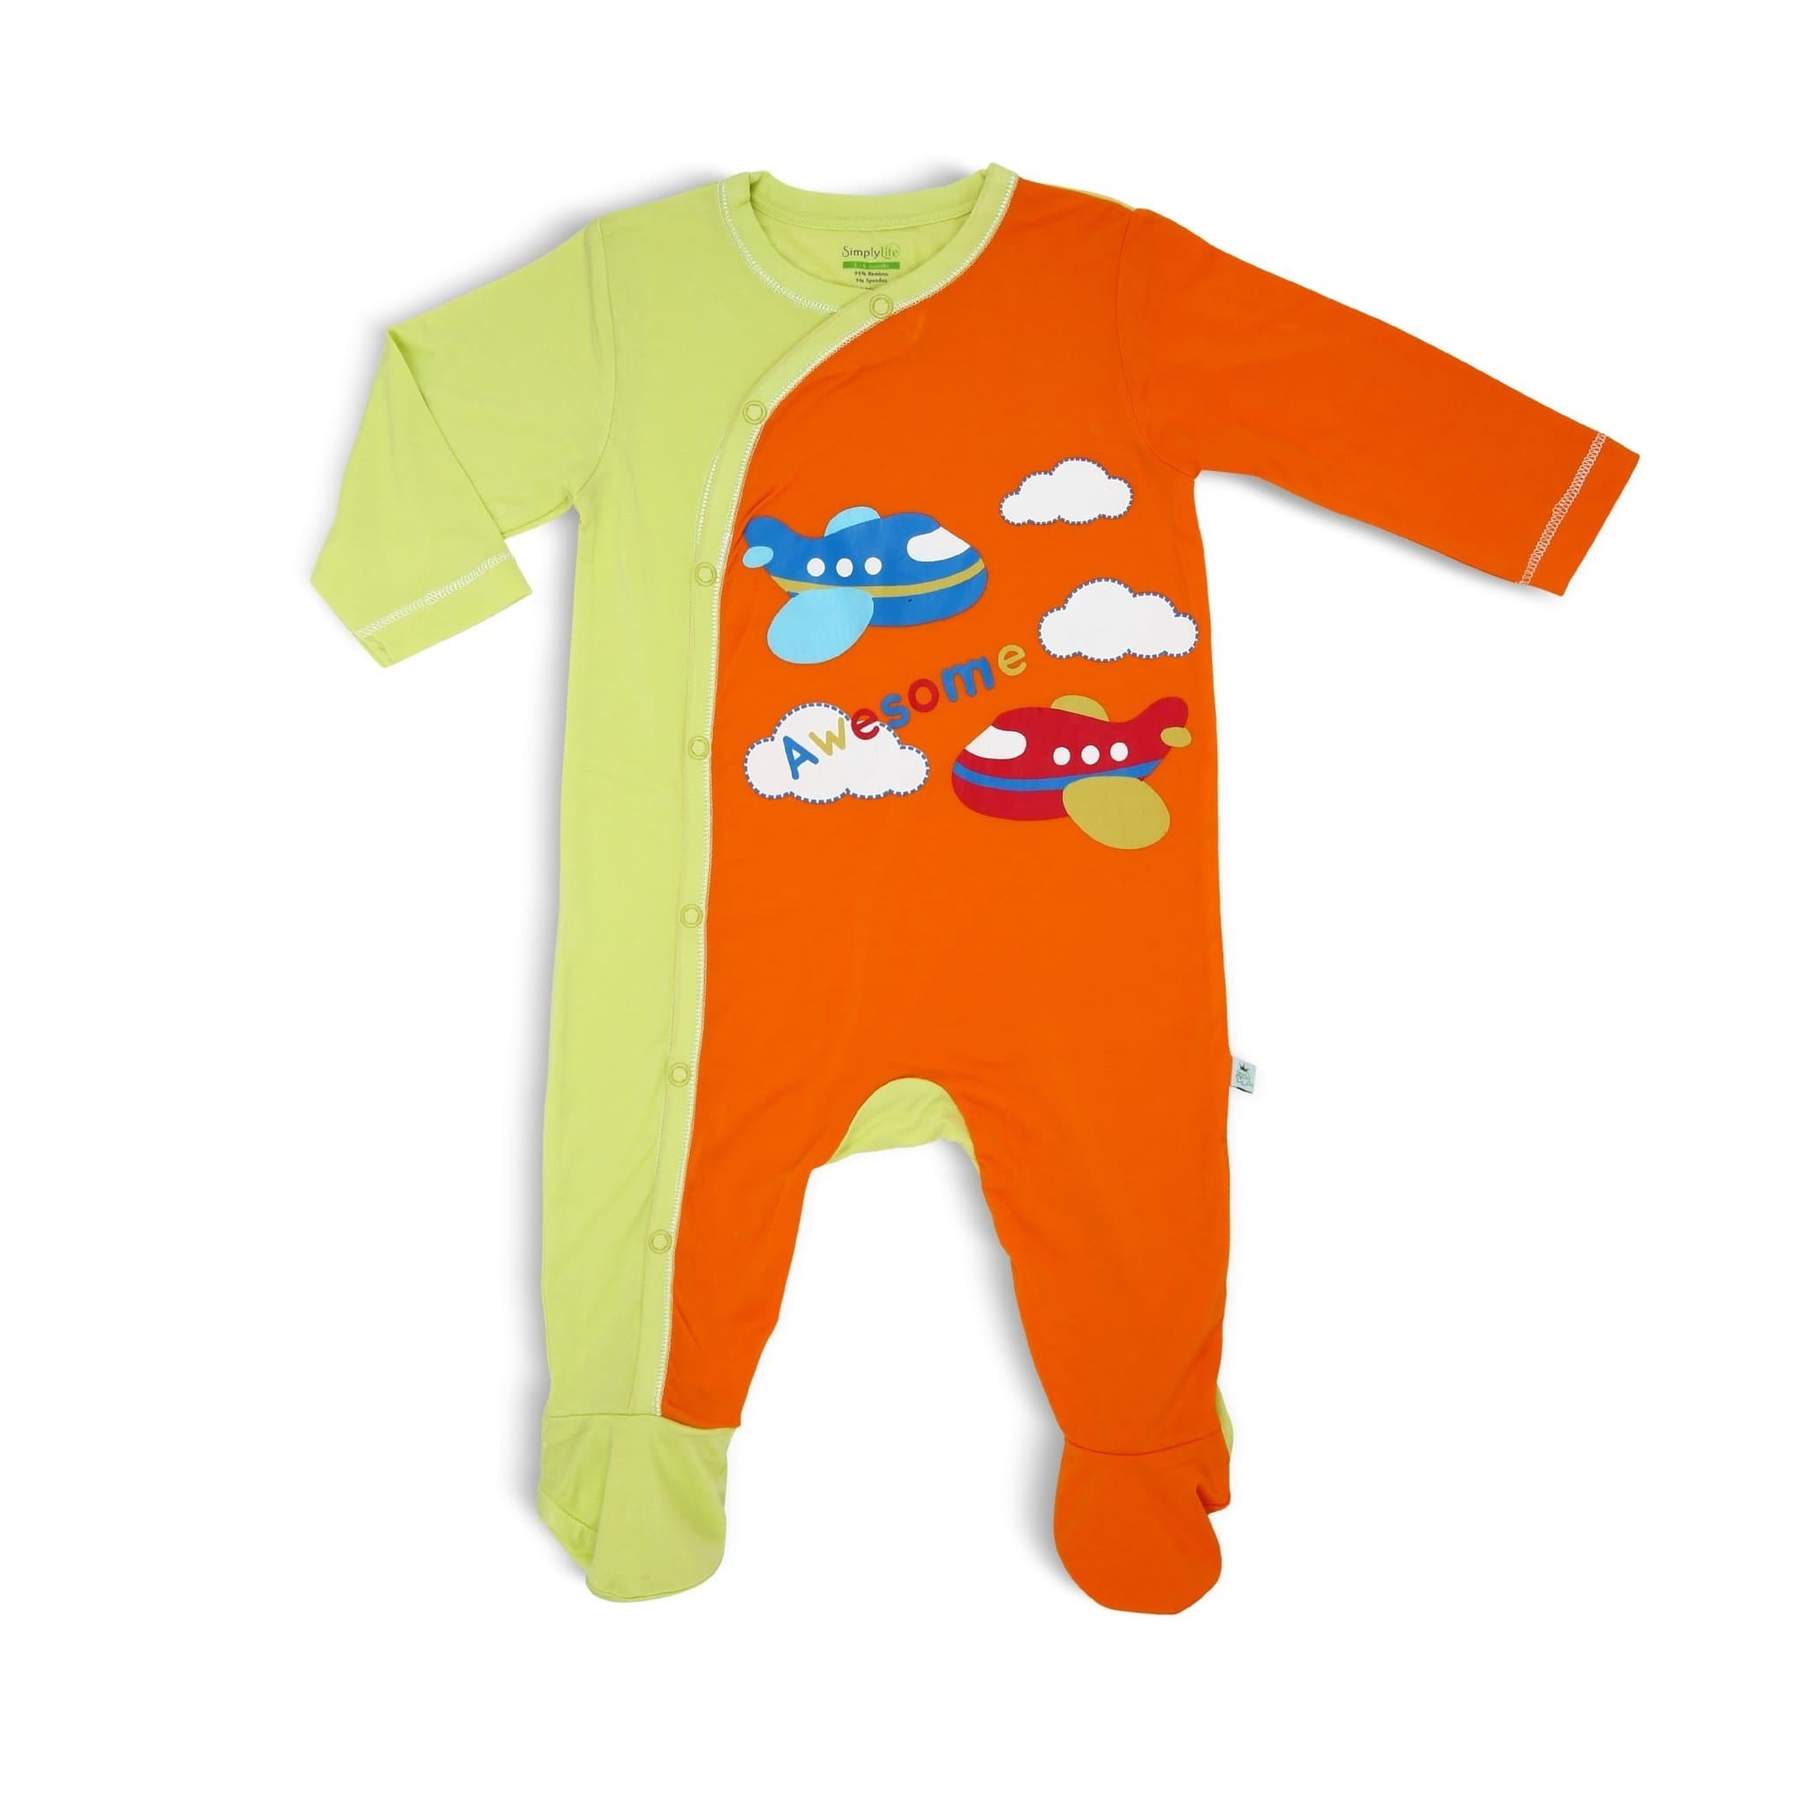 Baby Fair | Simply Life (Aeroplane) Boy - Side Snap Button Sleepsuit with Footie and Spot Print